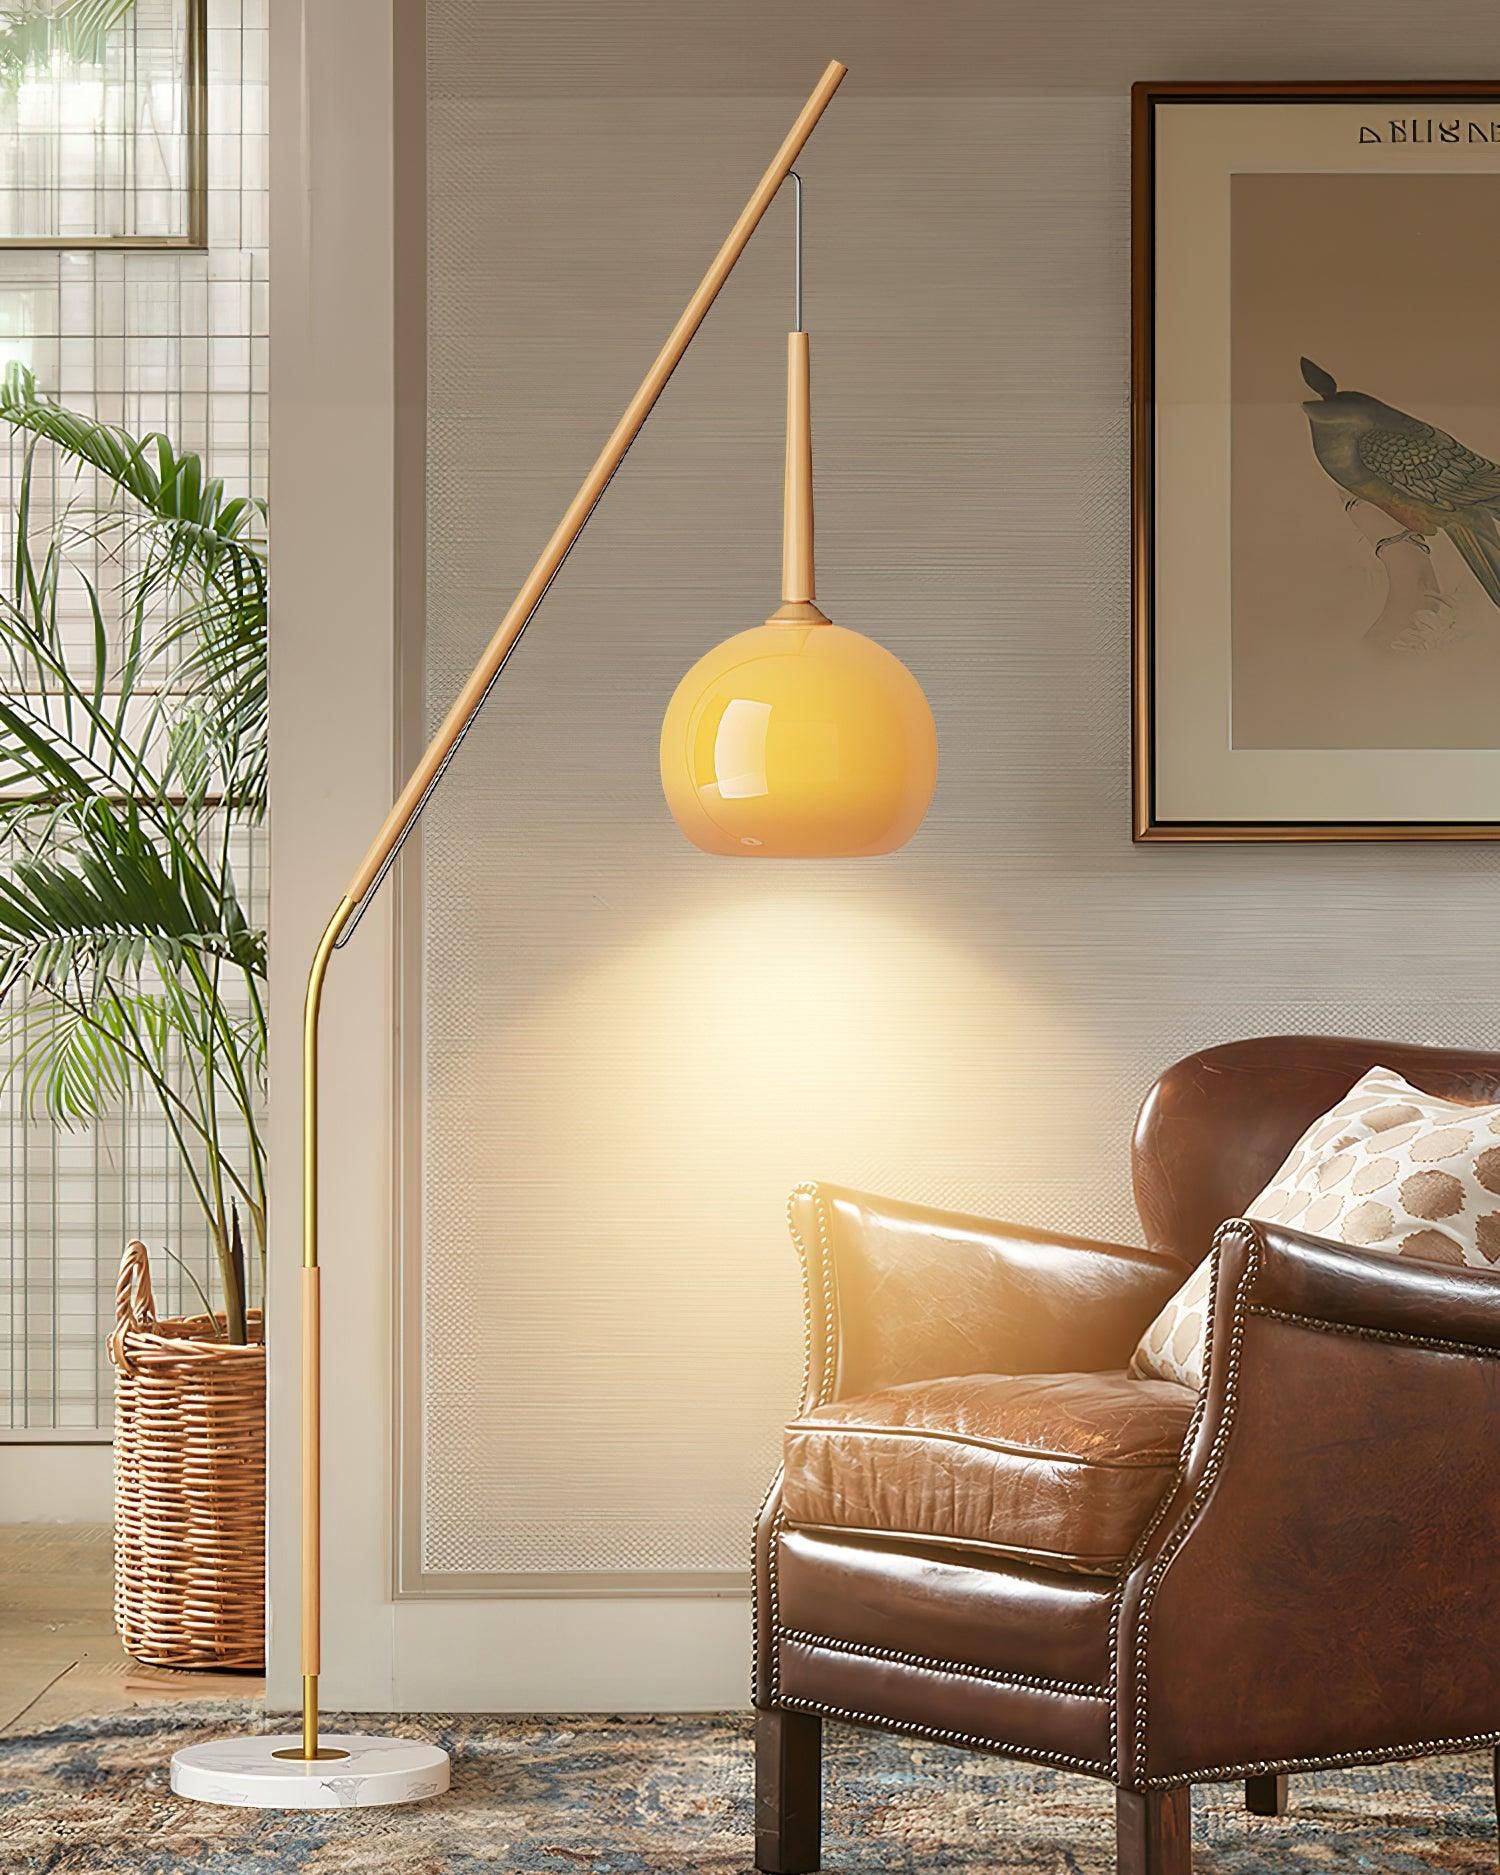 Colorful Floor Lamps Vibrant Light Fixtures to Brighten Up Any Room